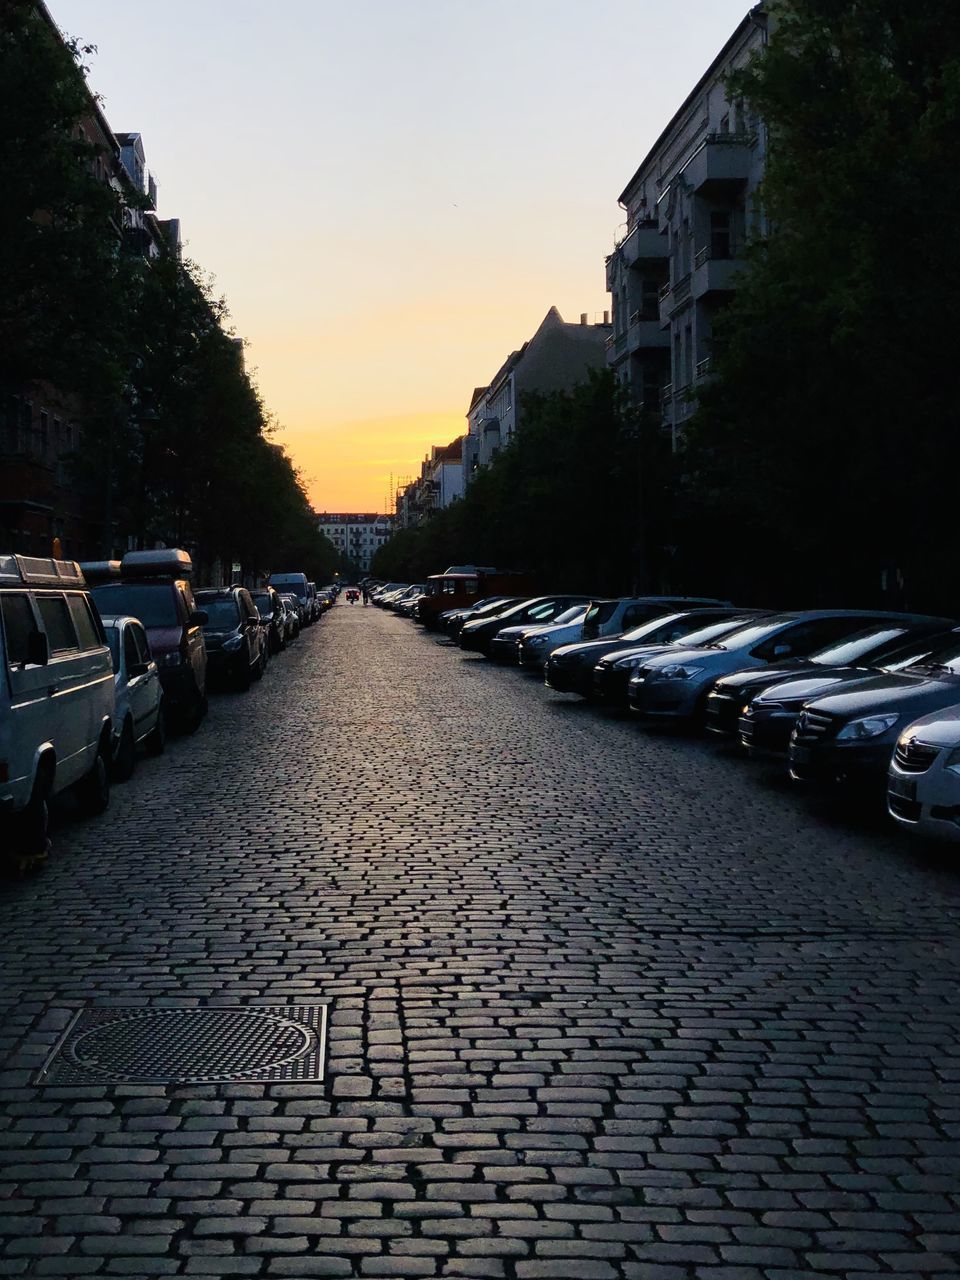 STREET AMIDST BUILDINGS IN CITY DURING SUNSET